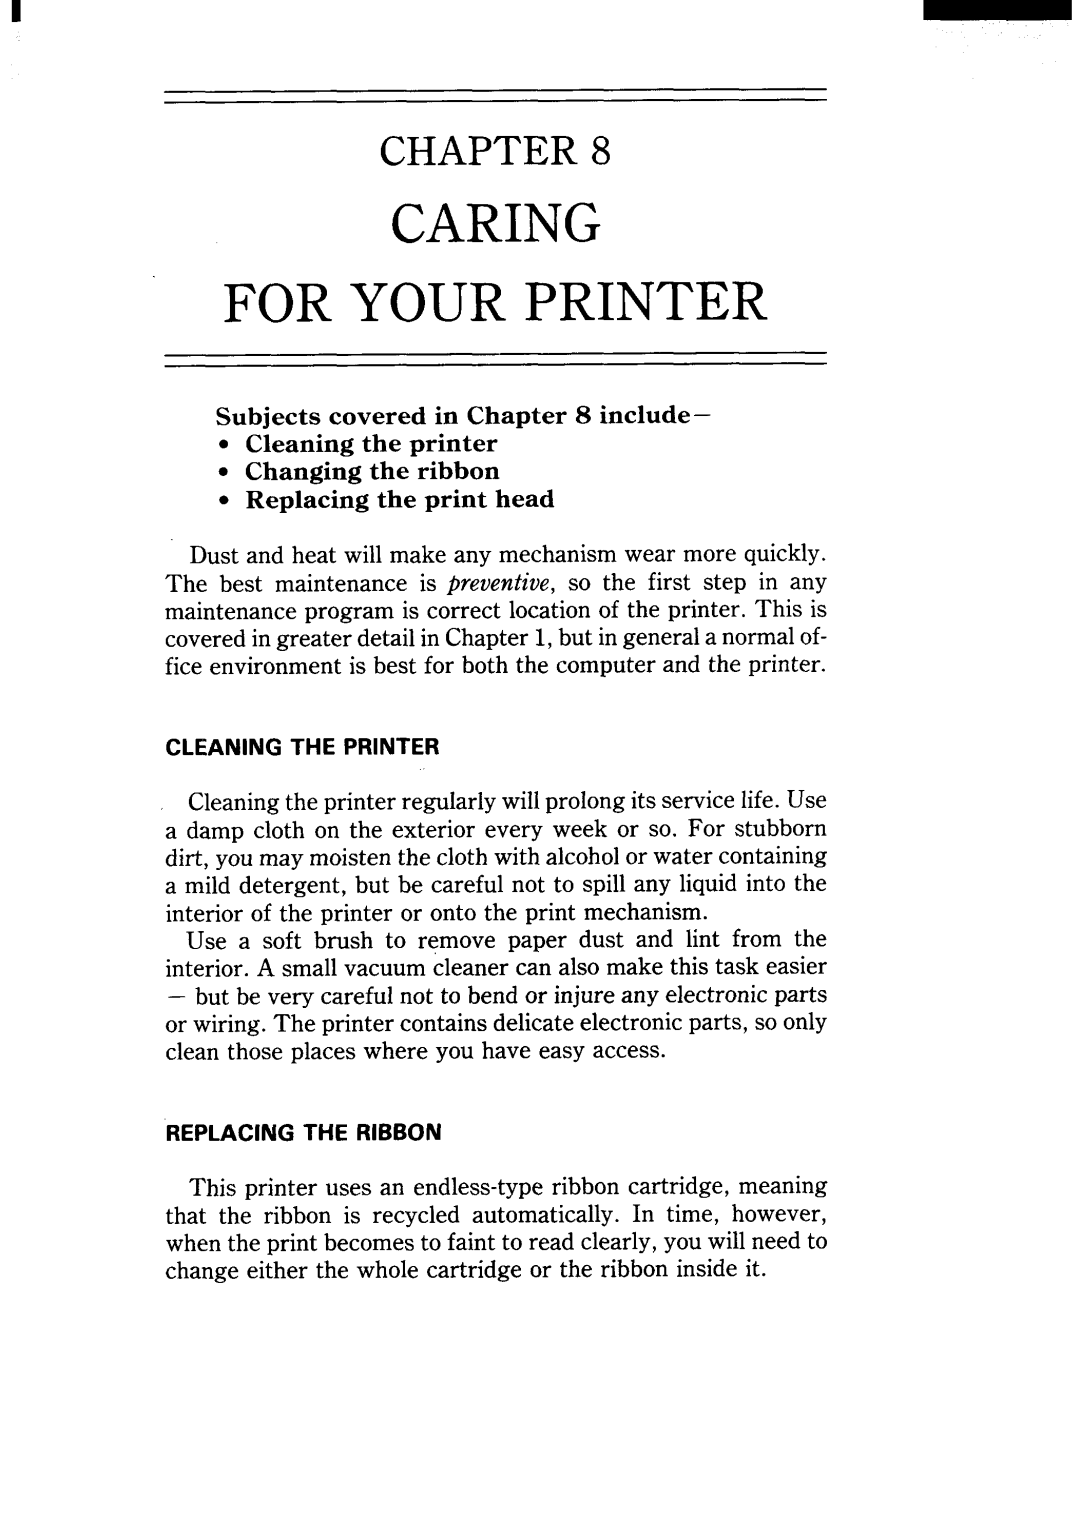 Star Micronics NX-15 user manual Caring For Your Printer, Chapter, Subjectscoveredin include Cleaningthe printer 